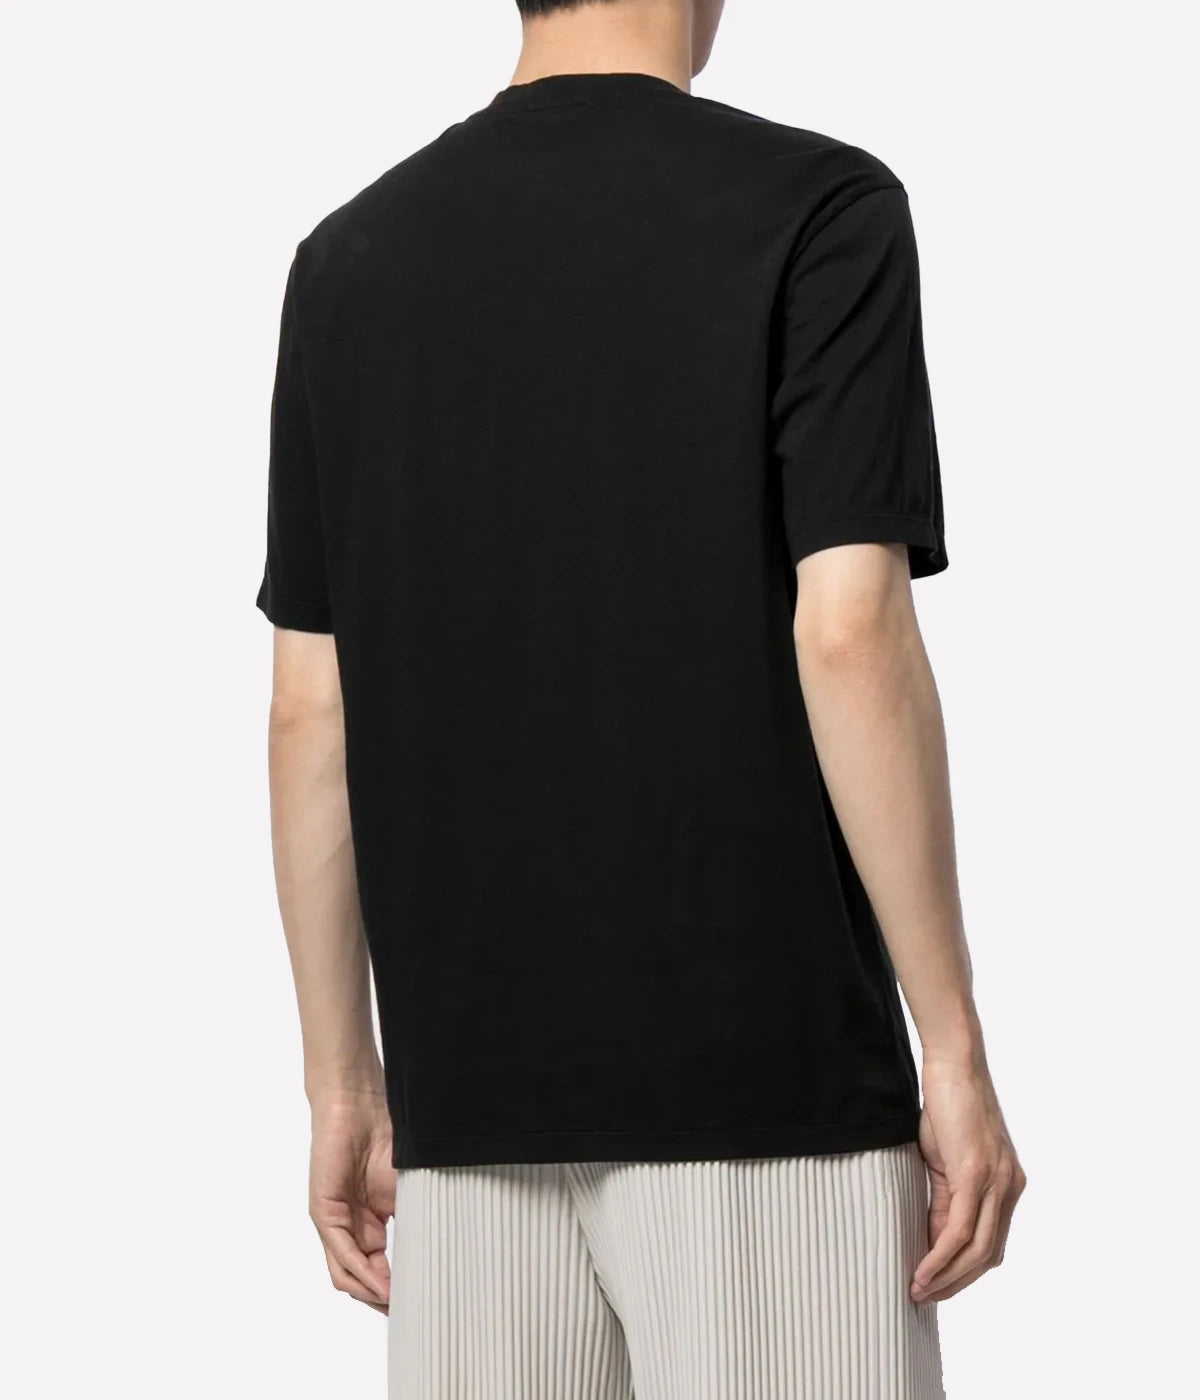 A short sleeve black t-shirt for men. Has a soft, lived-in feel. Wear everyday for a casual or dressed up look. Smooth and clean texture, perfect fit.